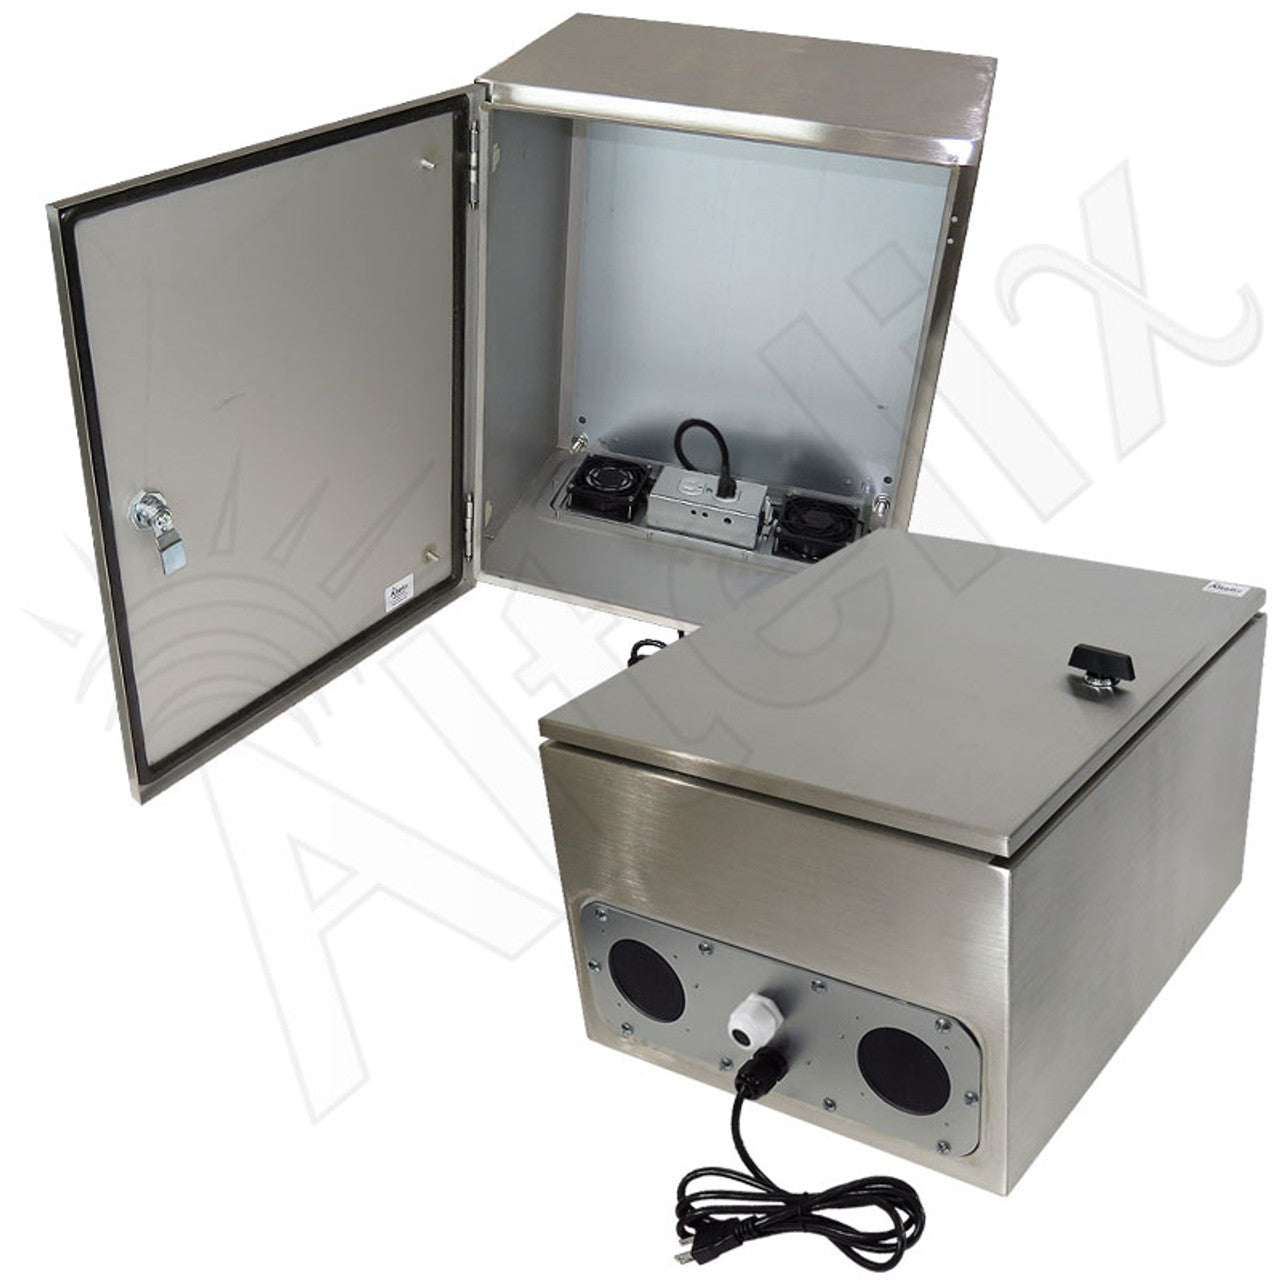 Altelix Stainless Steel Heated Weatherproof NEMA Enclosure with Dual Cooling Fans, 200W Heater, 120 VAC Outlets and Power Cord